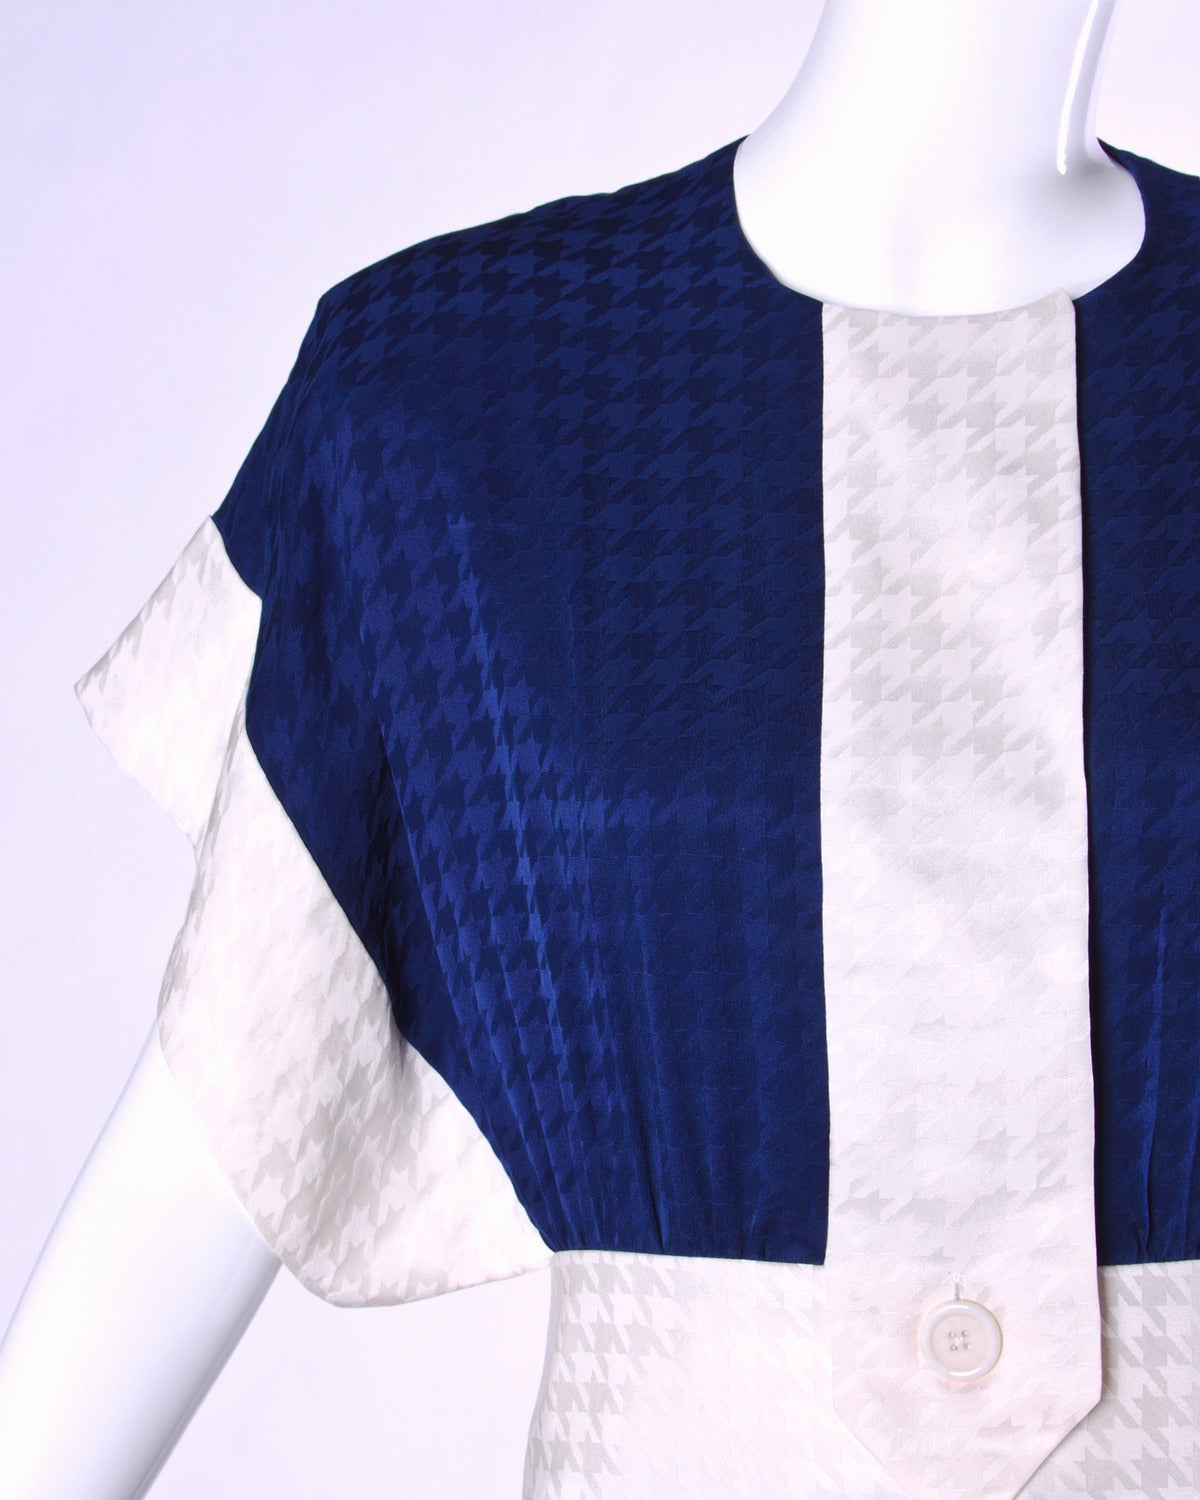 Gorgeous color block dress with batwing sleeves by I. Magnin. Houndstooth silk fabric.

Details:

Unlined
Side Pockets
Front Button Closure
Circa: 1980's
Marked Size: 12
Estimated Size: M
Color: Navy Blue/ White
Fabric: 100%